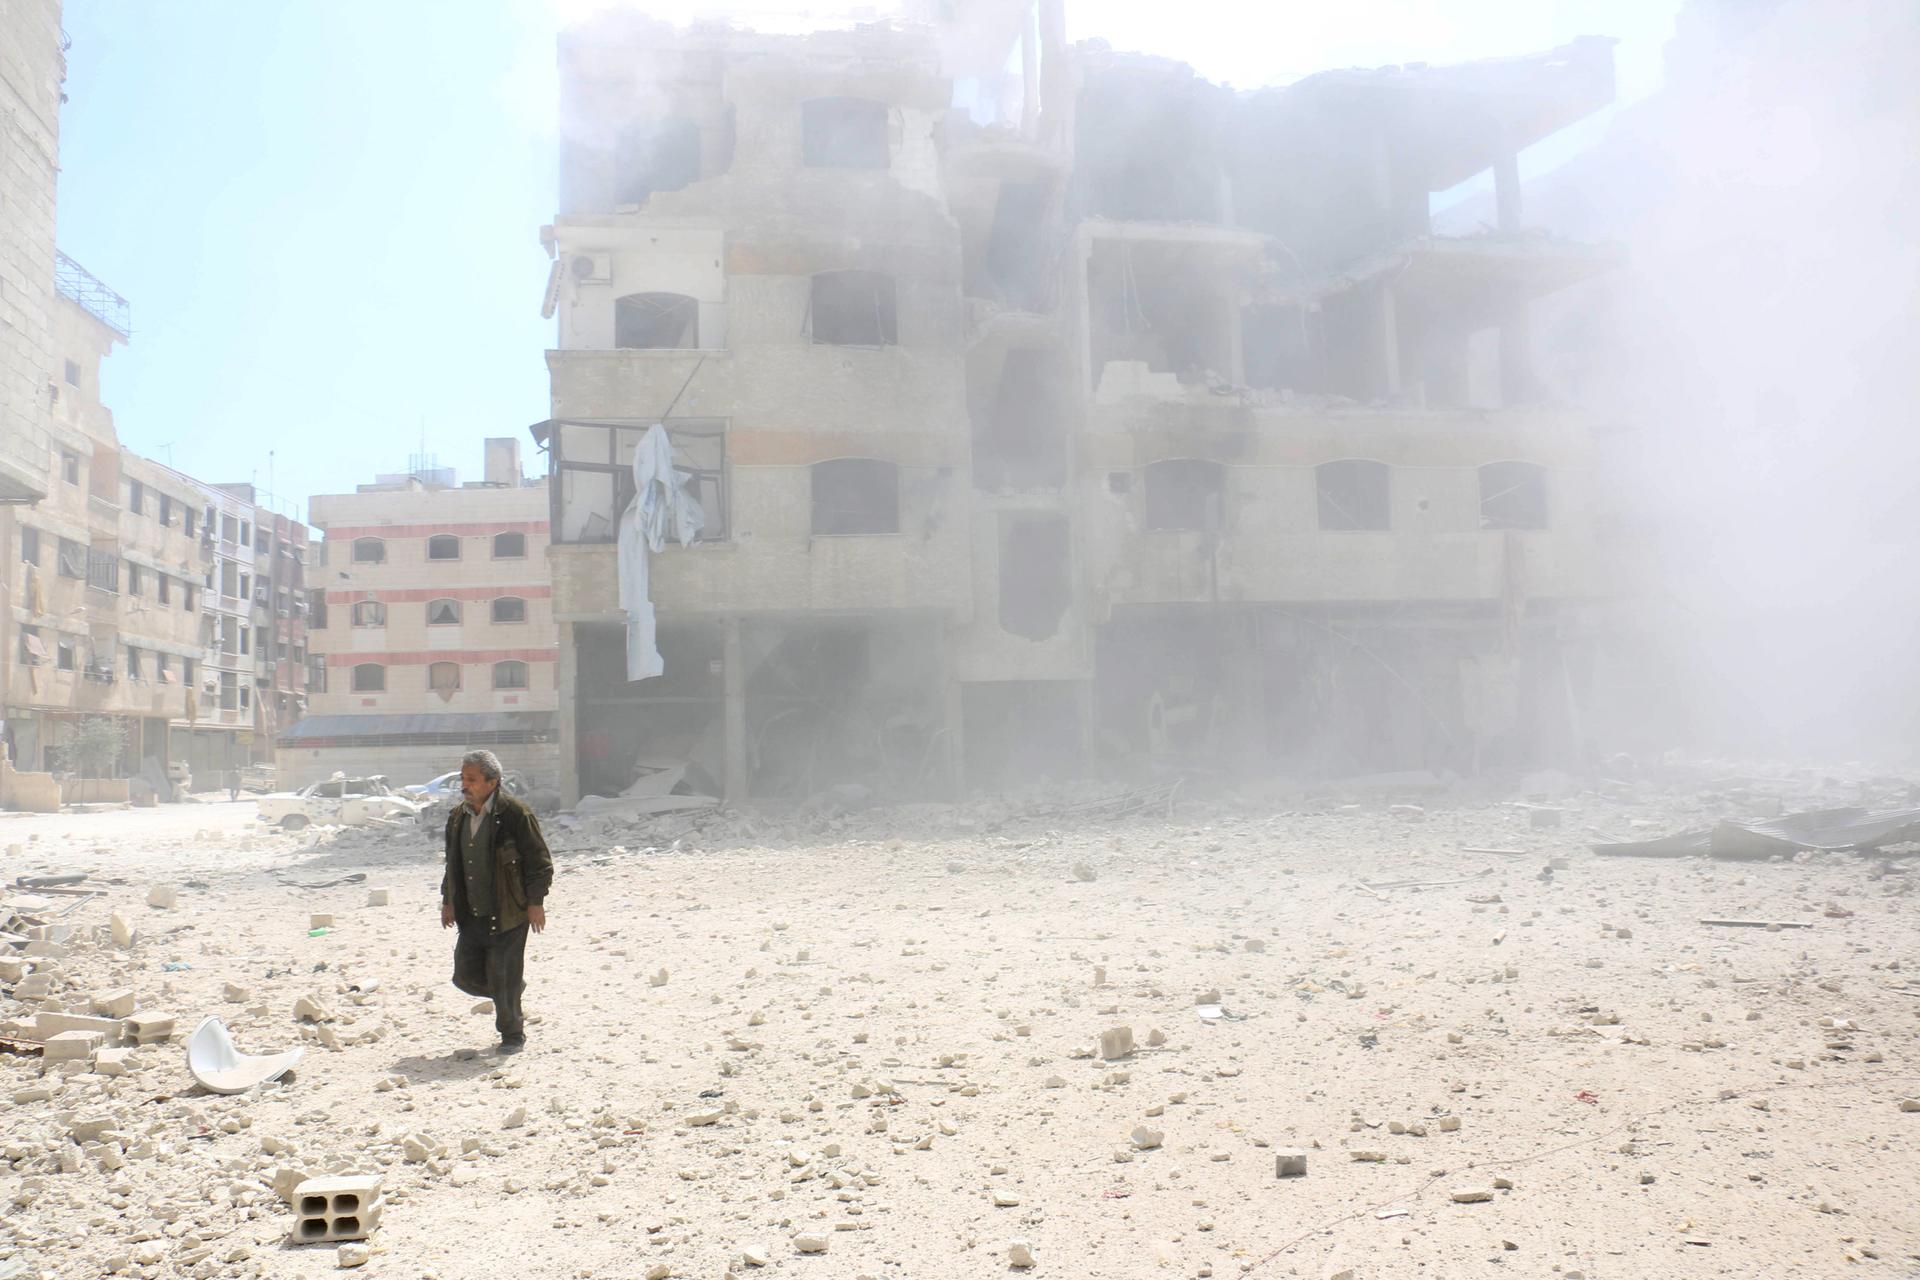 A man walks amid rubble of damaged buildings after what activists said was a mortar shell thrown on an area after air strikes by forces loyal to Syria's President Bashar al-Assad in Ain Tarma, in Eastern Ghouta, a suburb of Damascus, on April 5, 2015